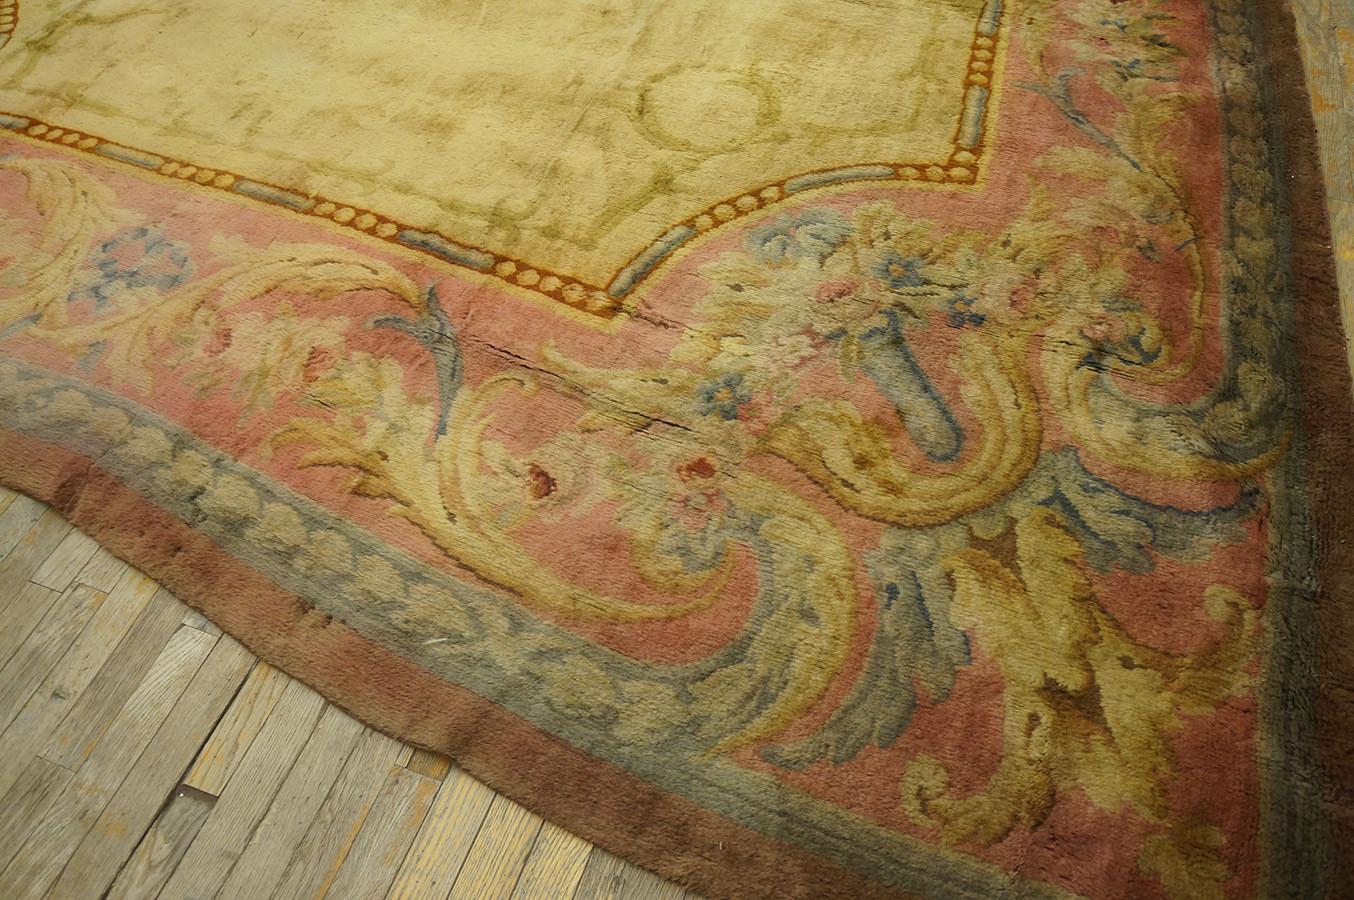 Late 19th Century French Savonnerie Carpet (12' 3'' x 21' - 375 x 640 cm ) For Sale 2